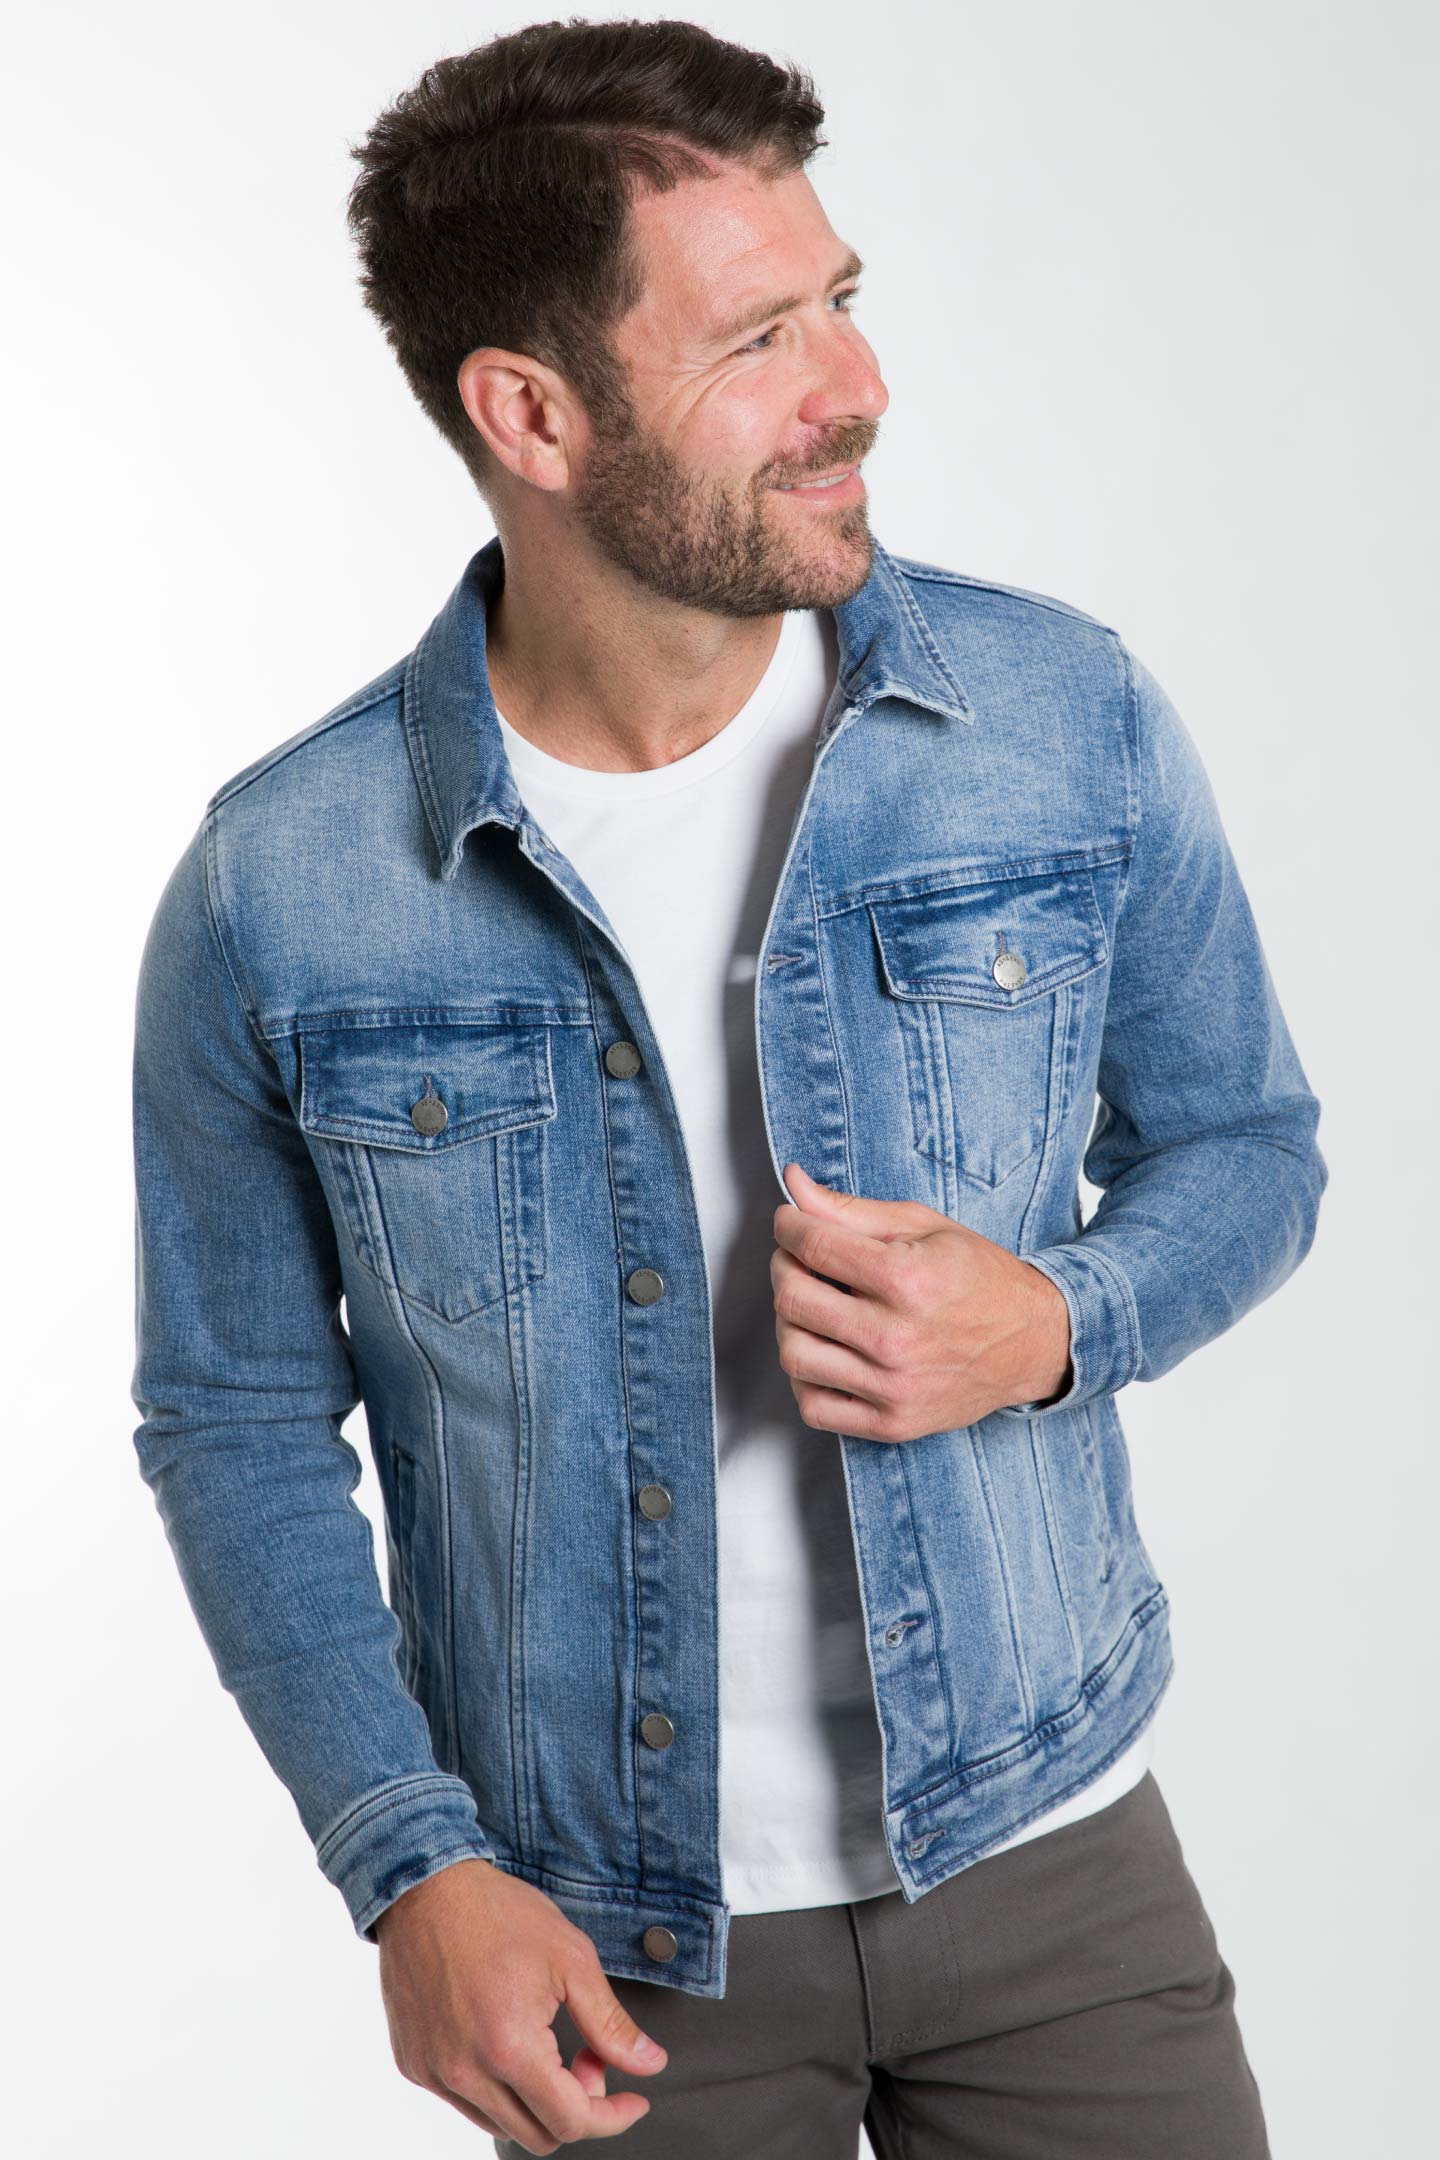 The New Rules Of Double Denim | FashionBeans | Leather jacket outfit men, Jean  jacket outfits men, Blue jean jacket outfits